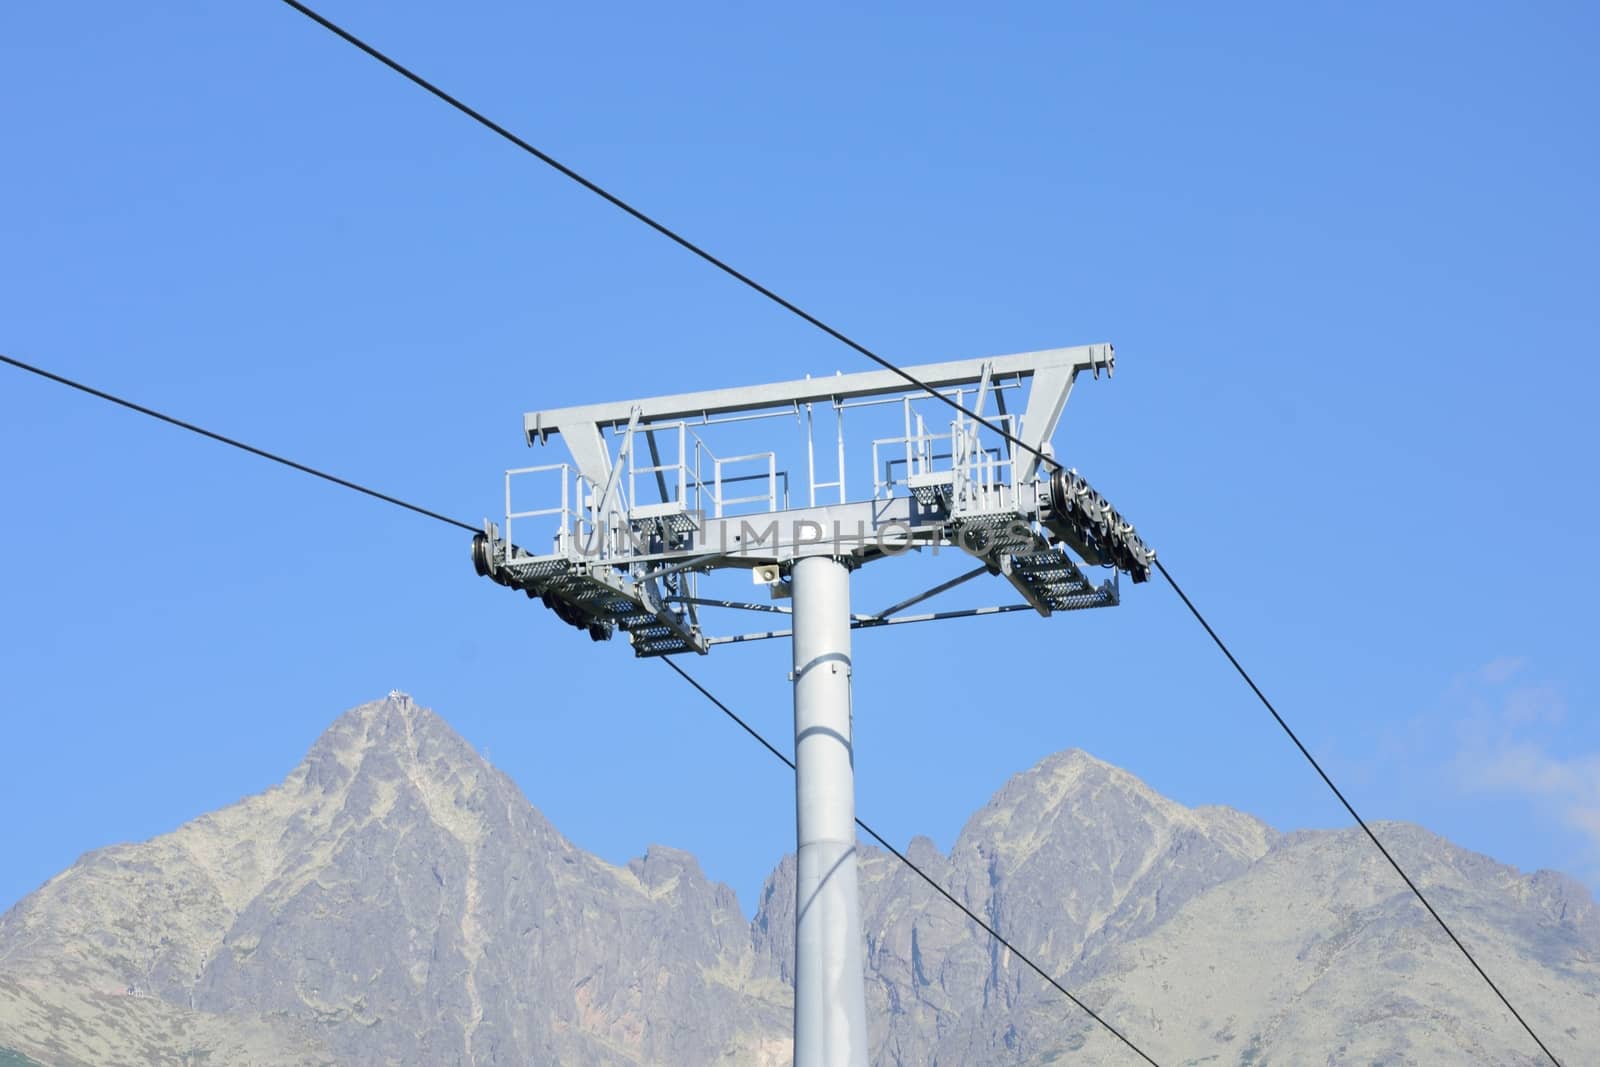 Chair lift mechanism with mountain in background